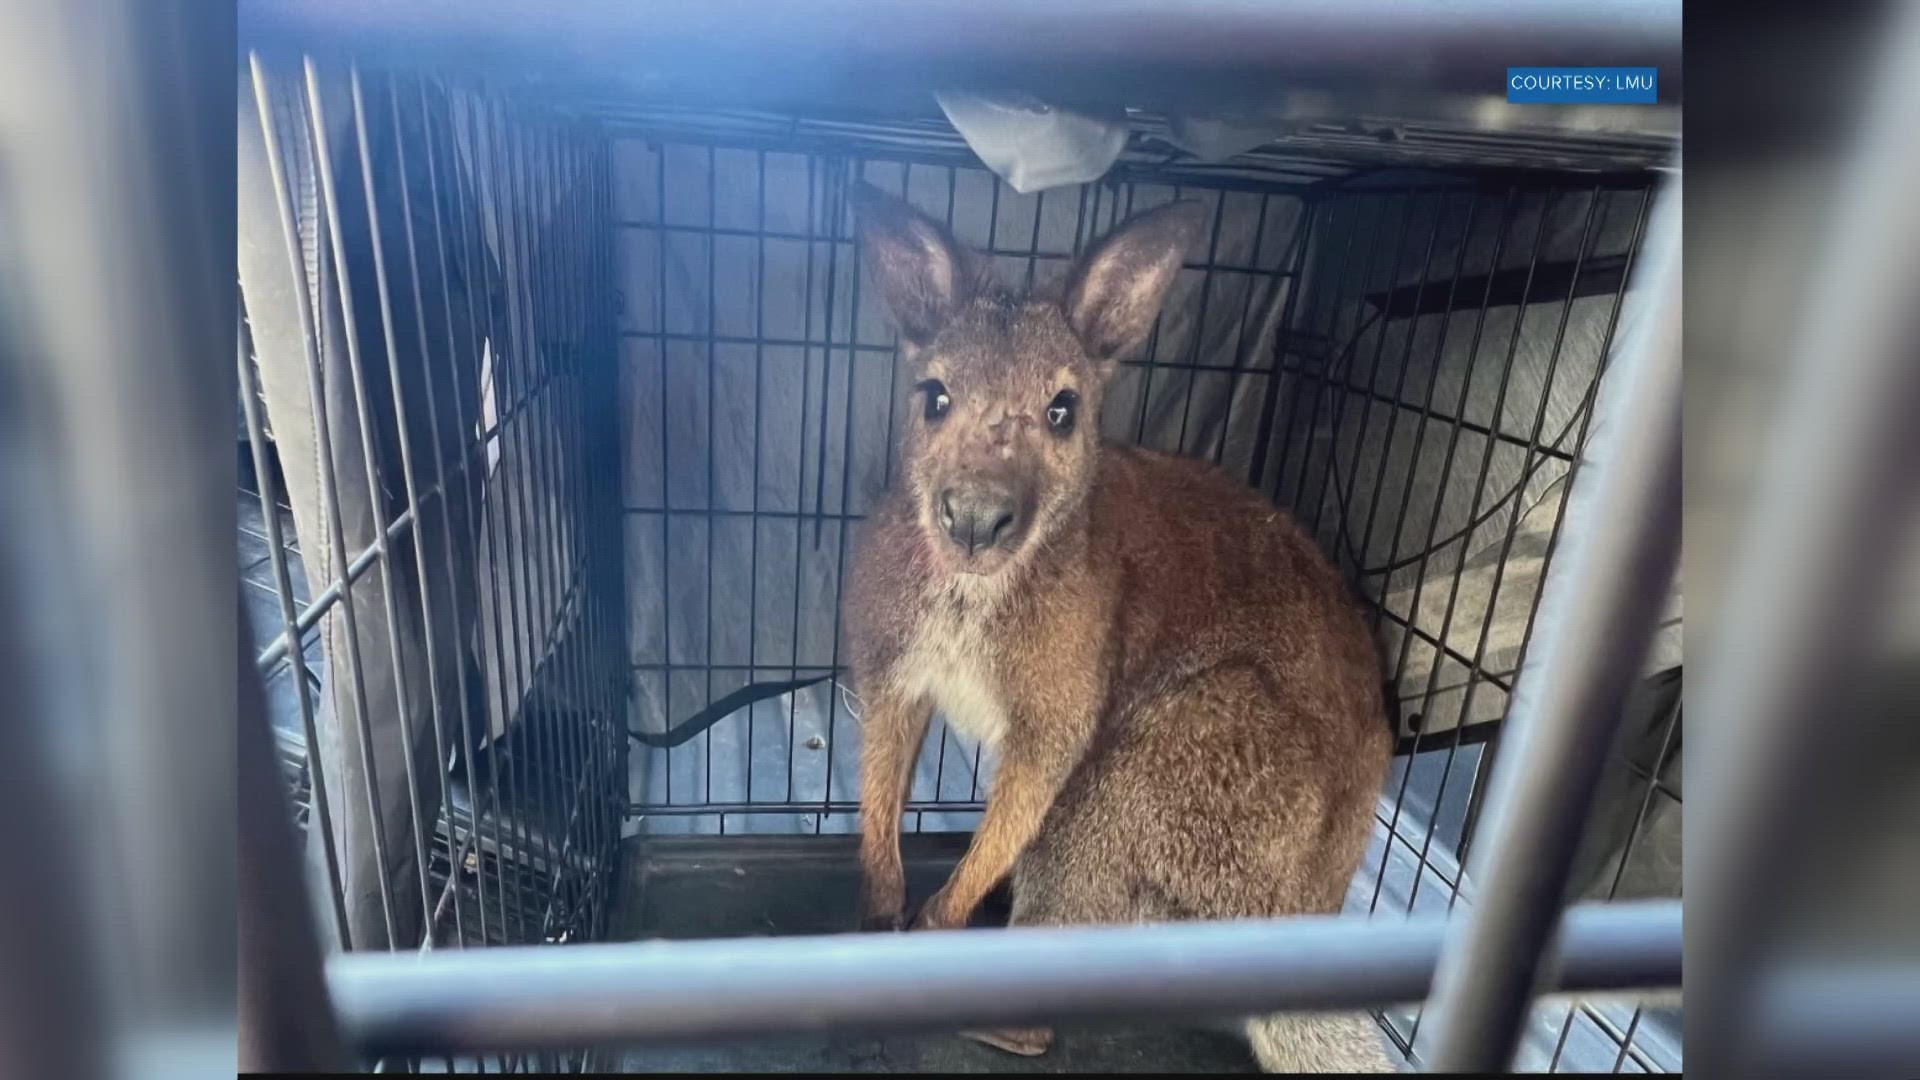 A spokesperson with LMU said the wallaby was seen hopping across campus around 9 a.m.